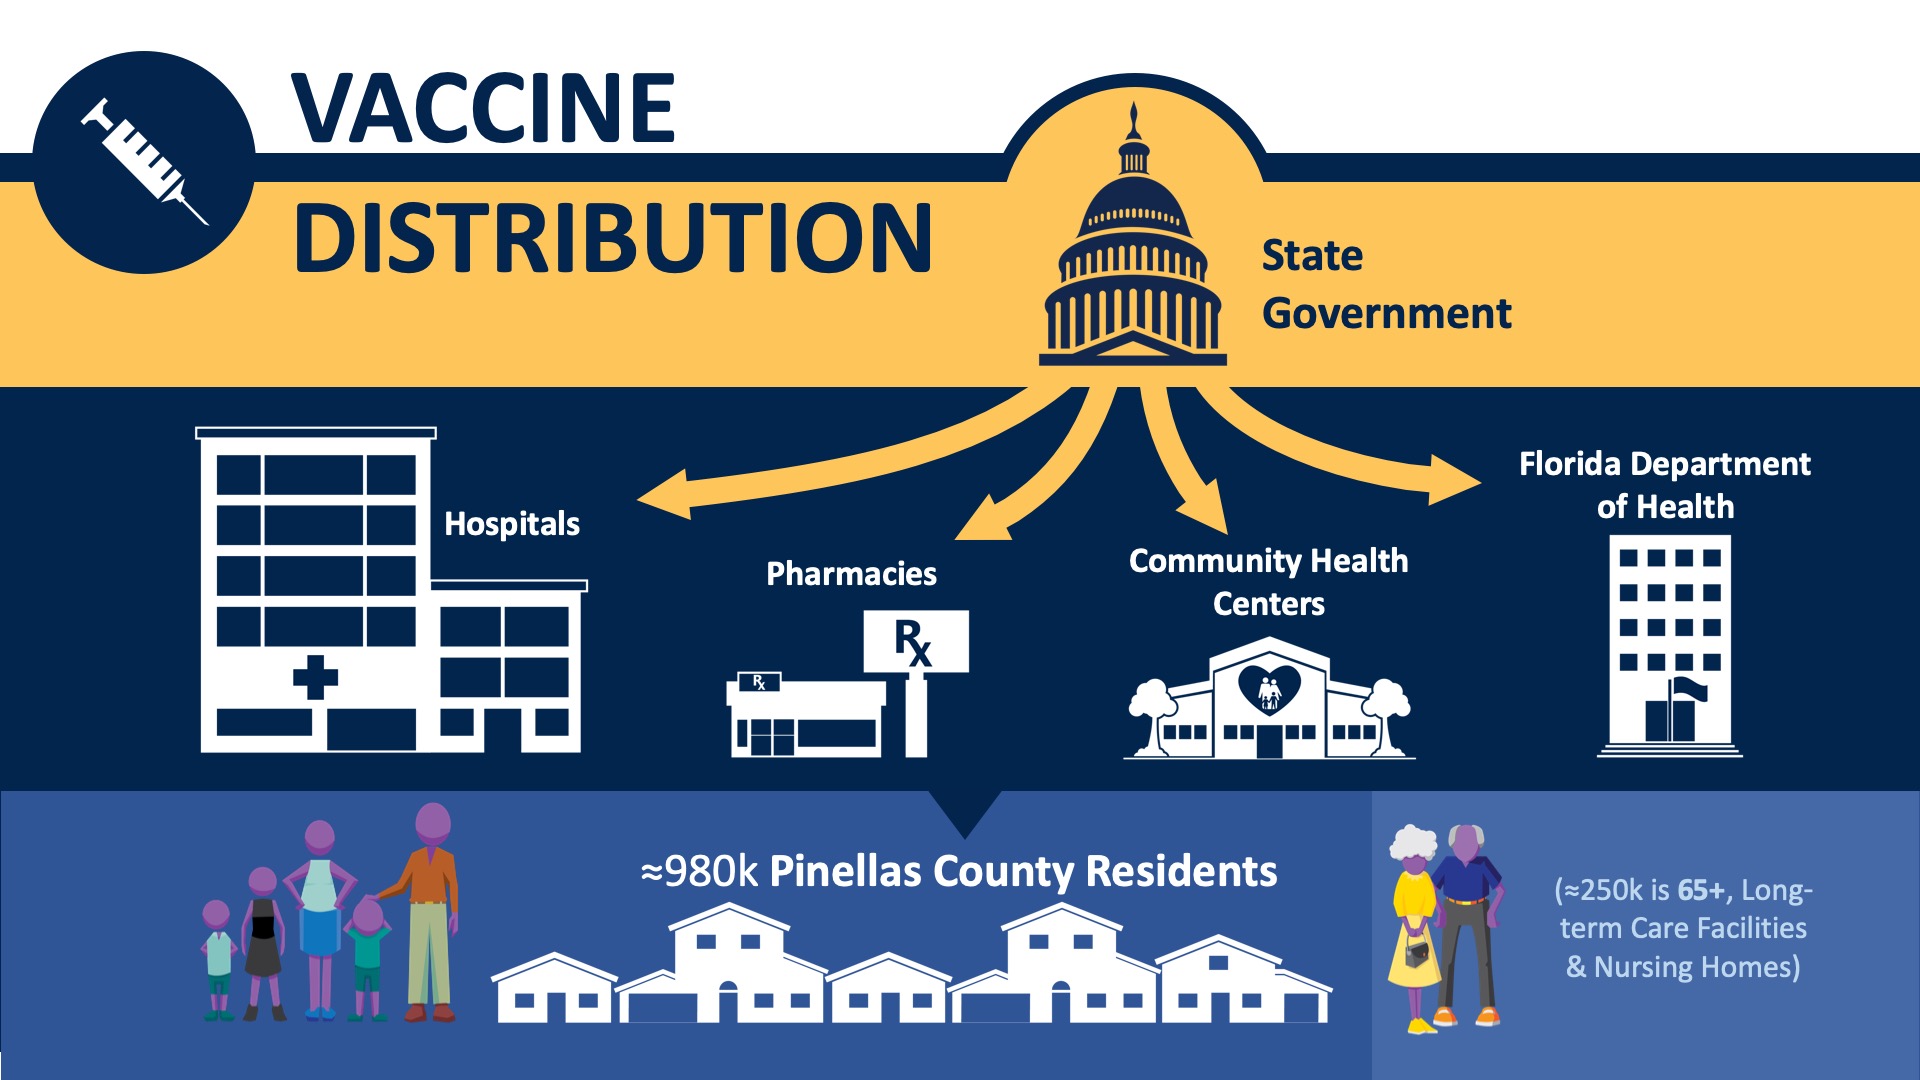 Covid-19 Vaccine Information - Pinellas County Covid-19 Response And Recommendations